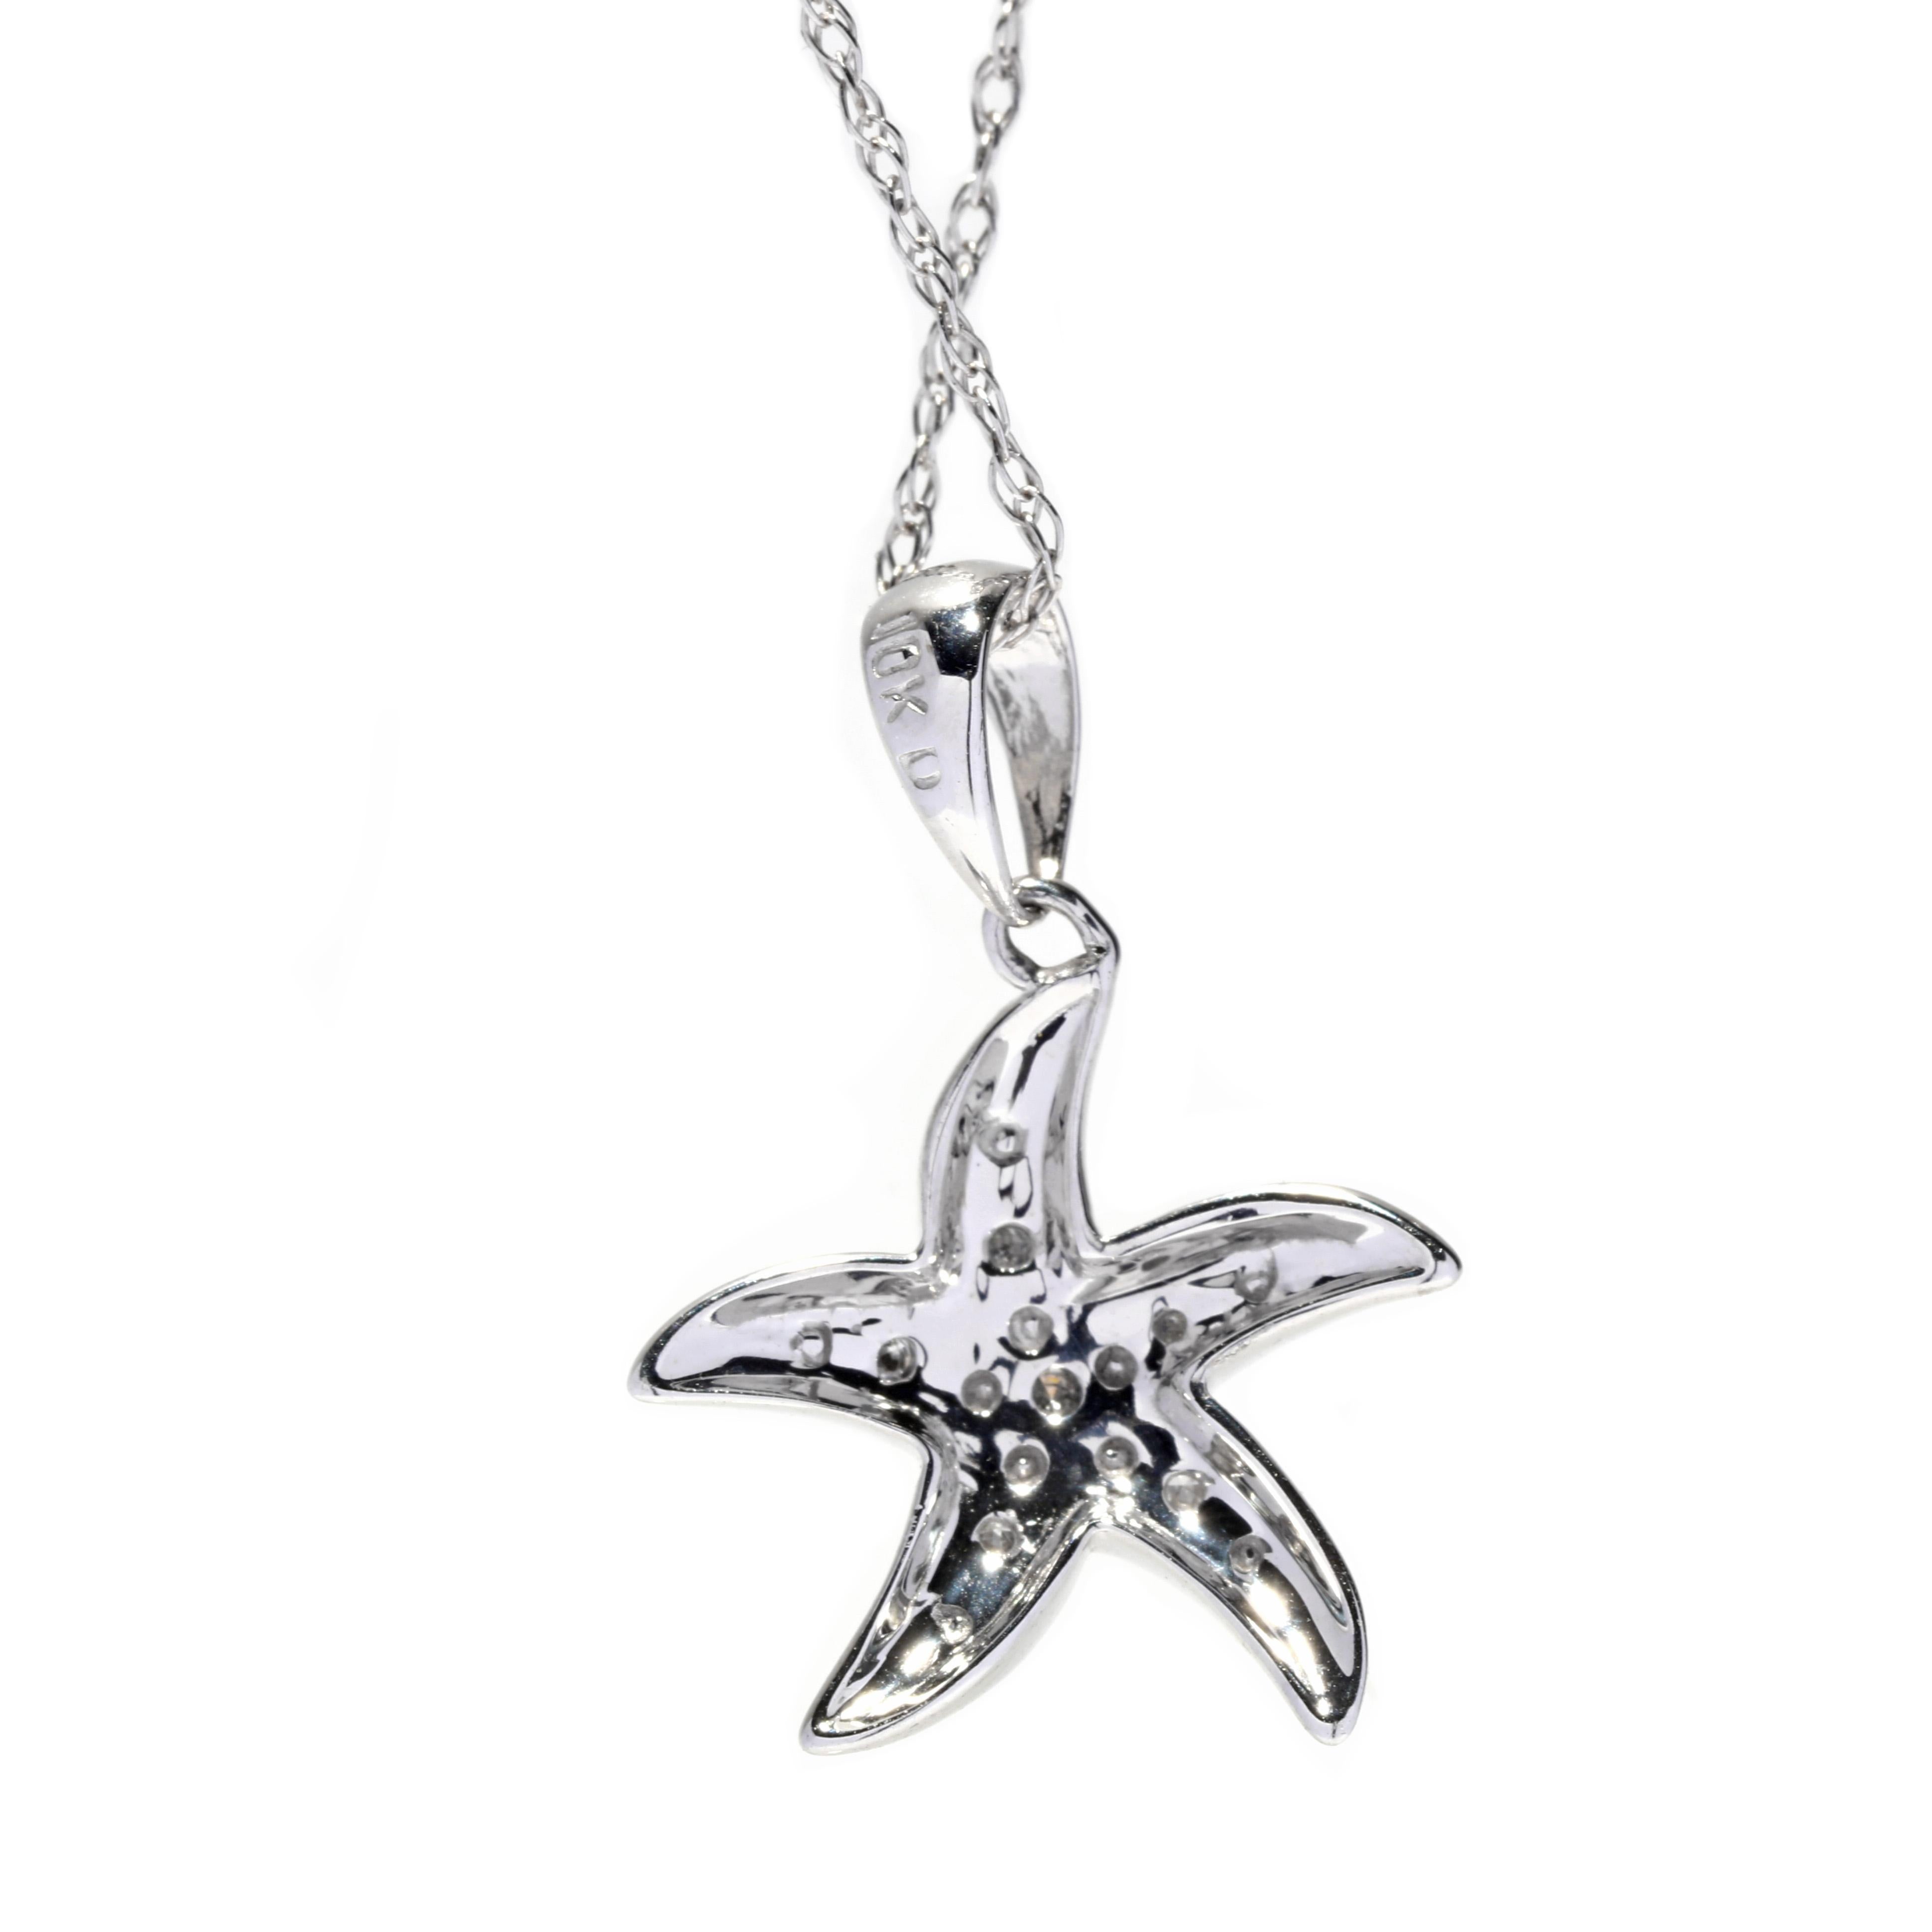 A vintage 10 karat white gold diamond starfish pendant necklace. This necklace features a starfish pendant set with single cut round diamonds weighing approximately .03 total carats suspended from a thin rope chain with a spring ring